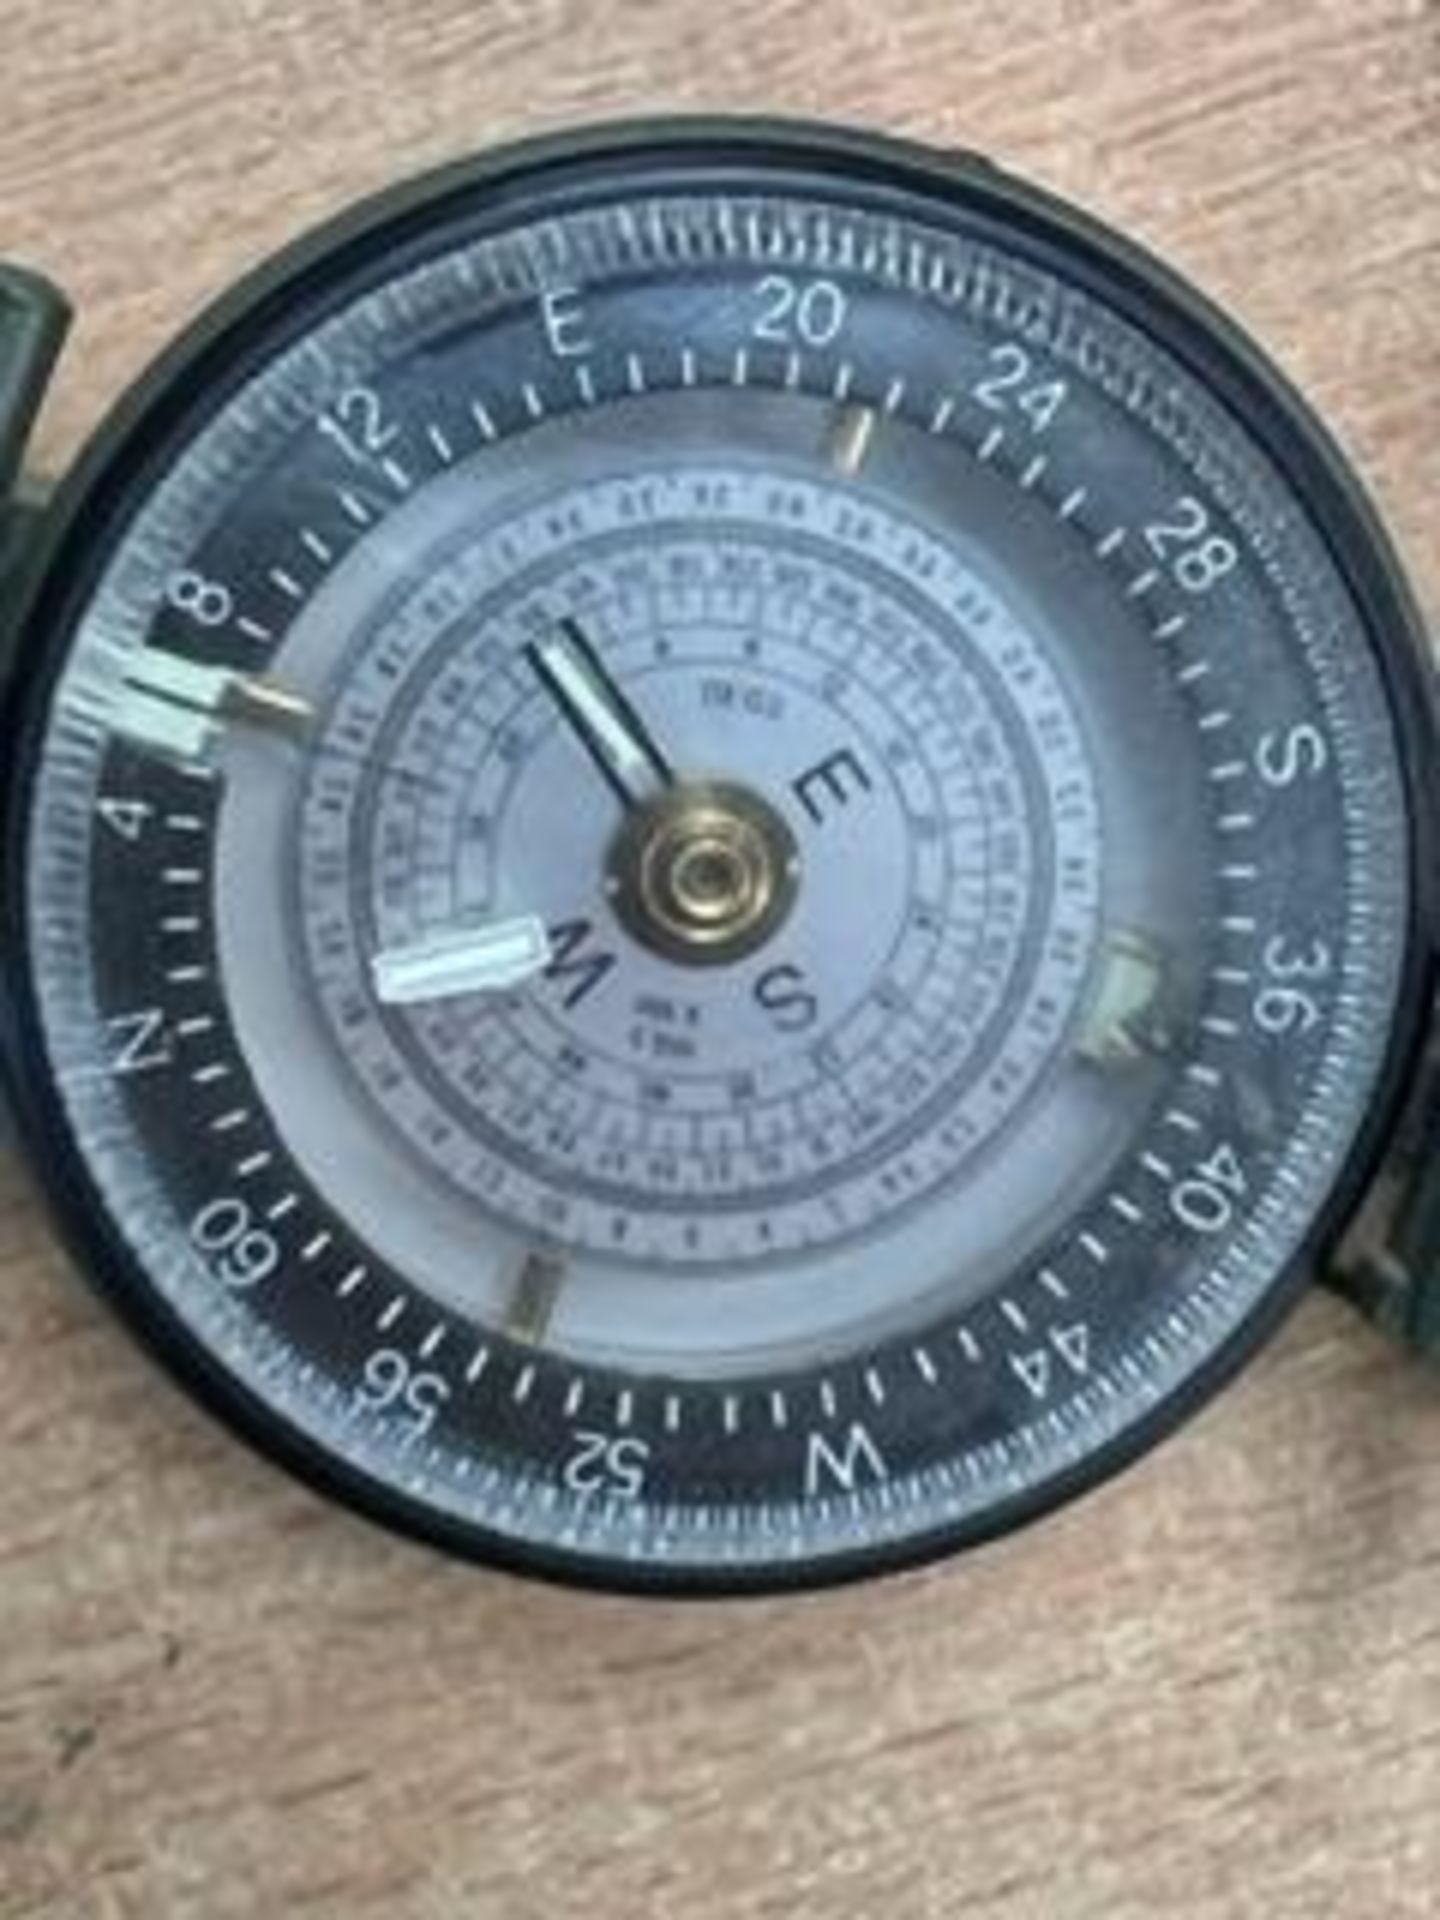 FRANCIS BAKER M88 BRITISH ARMY PRISMATIC COMPASS IN MILS NATO MARKS - Image 3 of 7